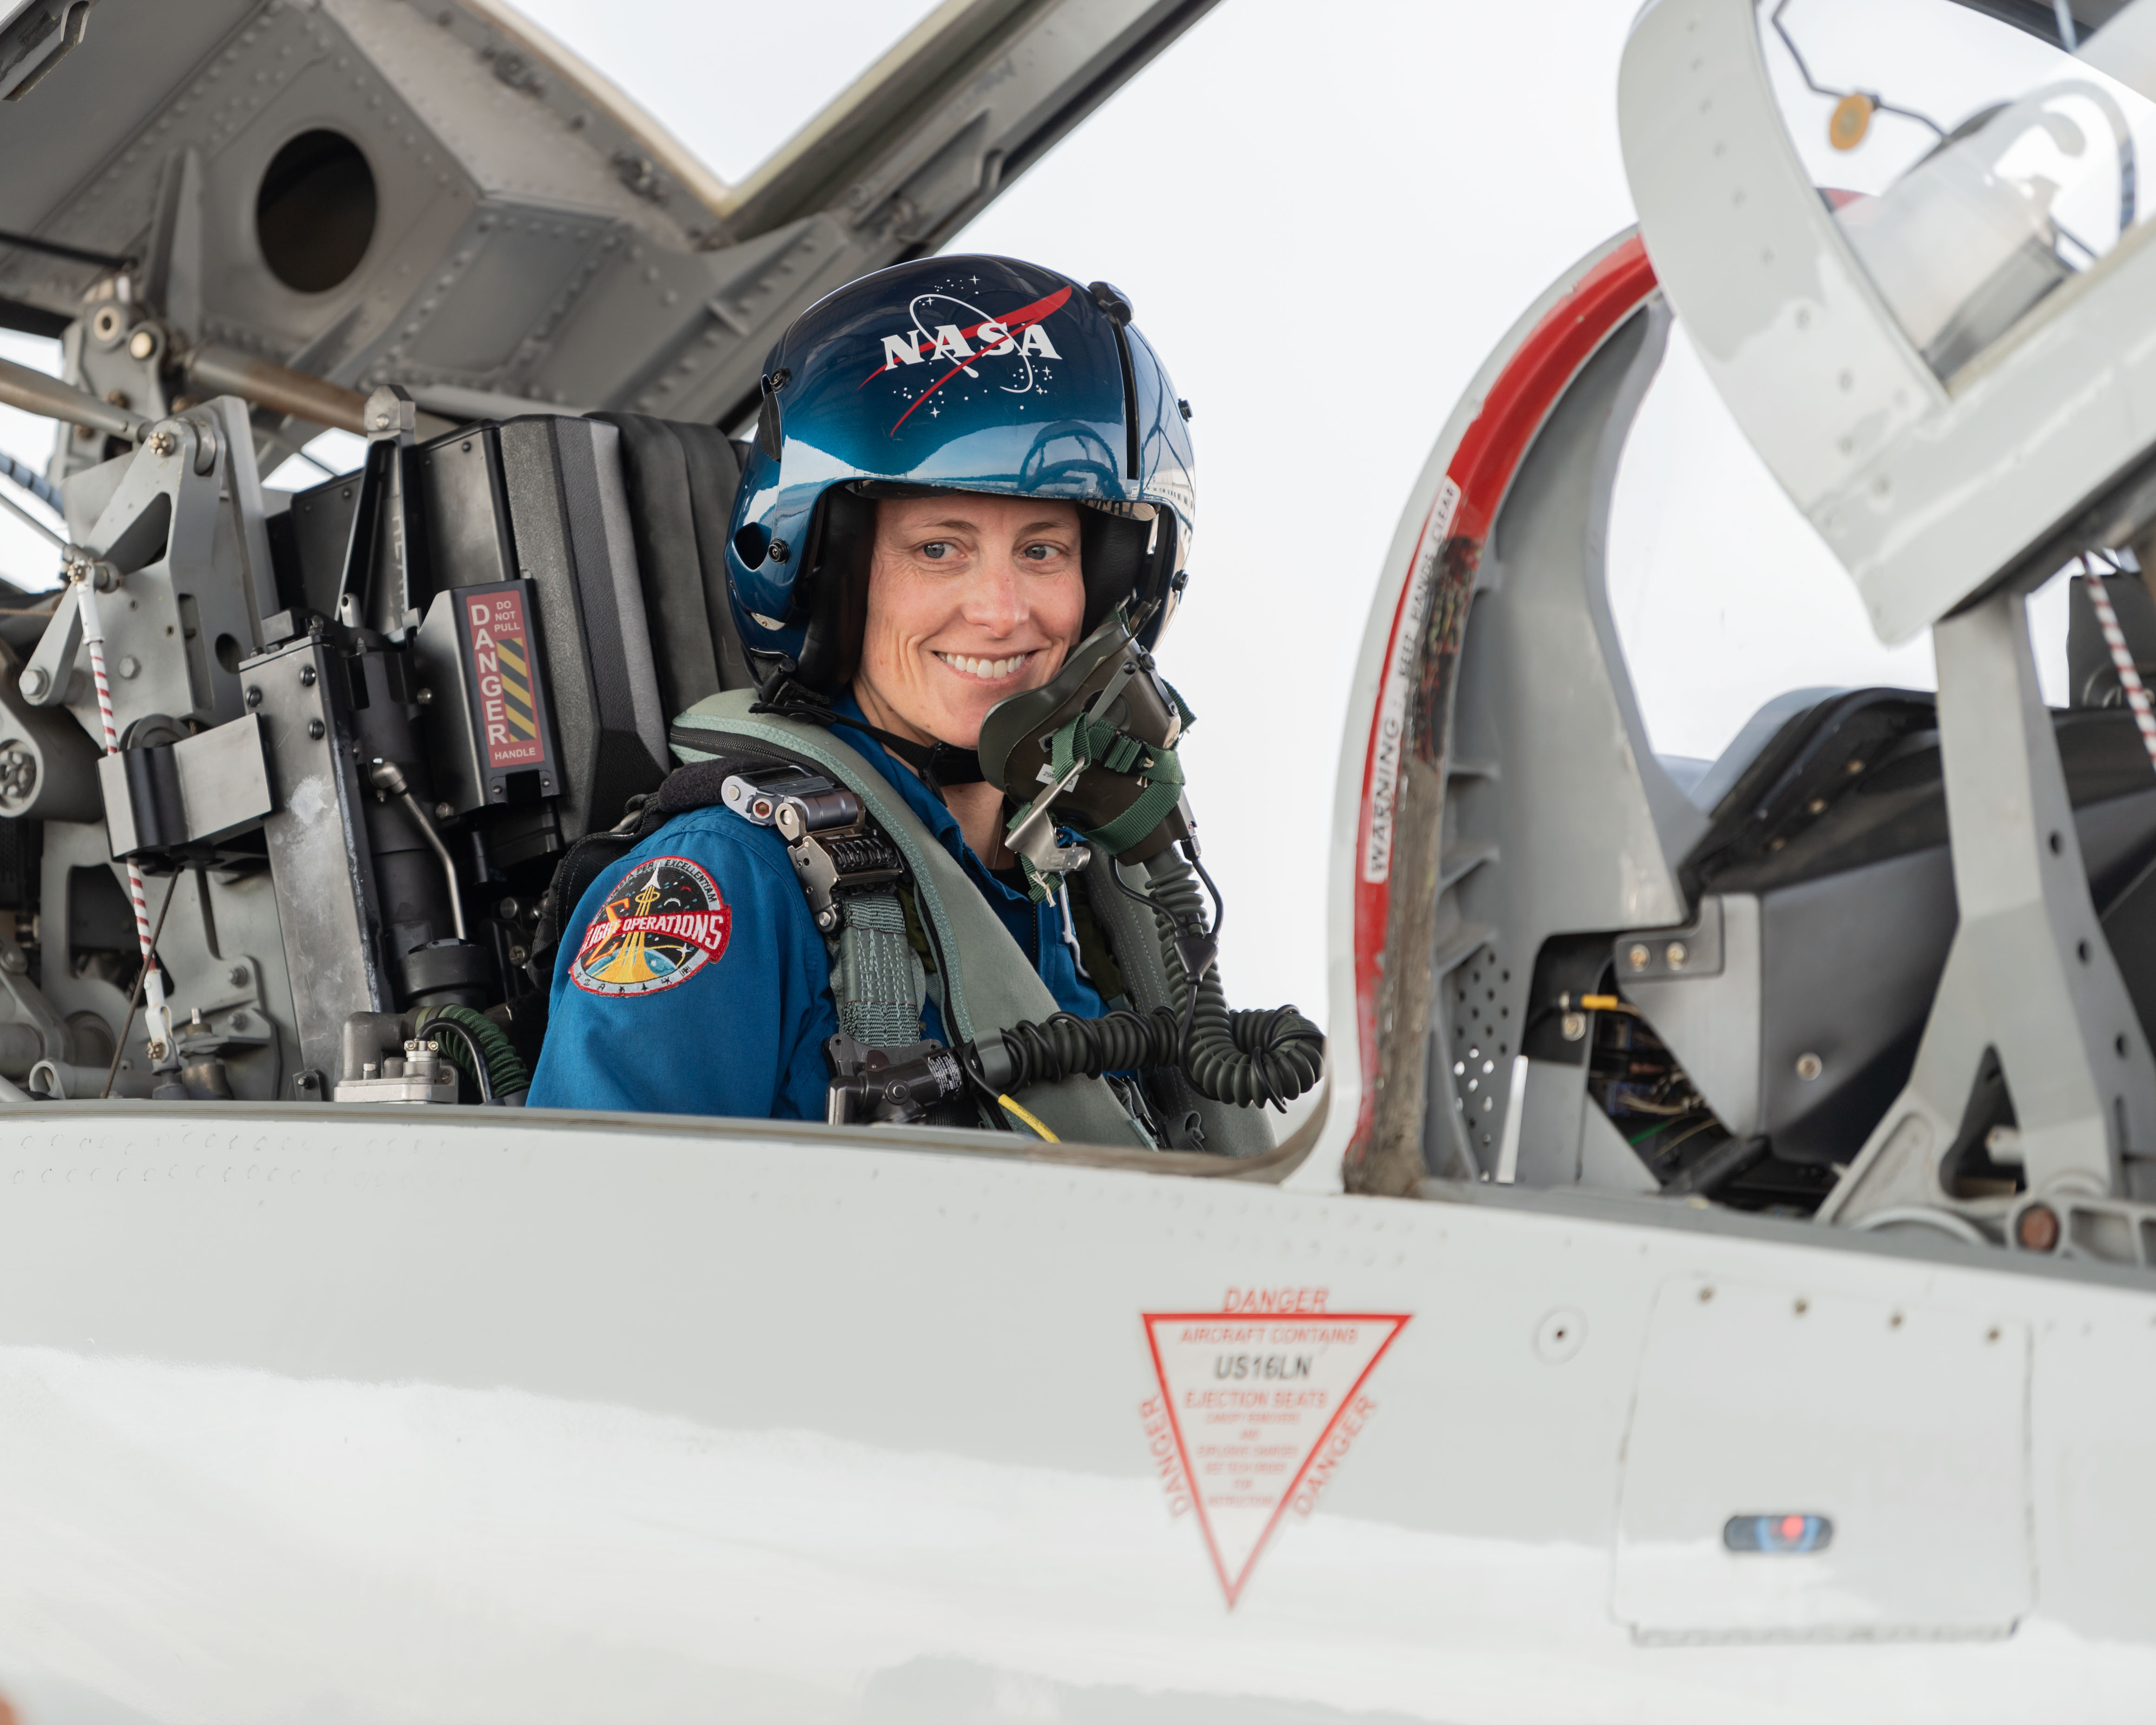 NASA astronaut Loral O'Hara conducts preflight training aboard a T-38 trainer jet at Ellington Field in Houston, Texas, before beginning her mission to the International Space Station.